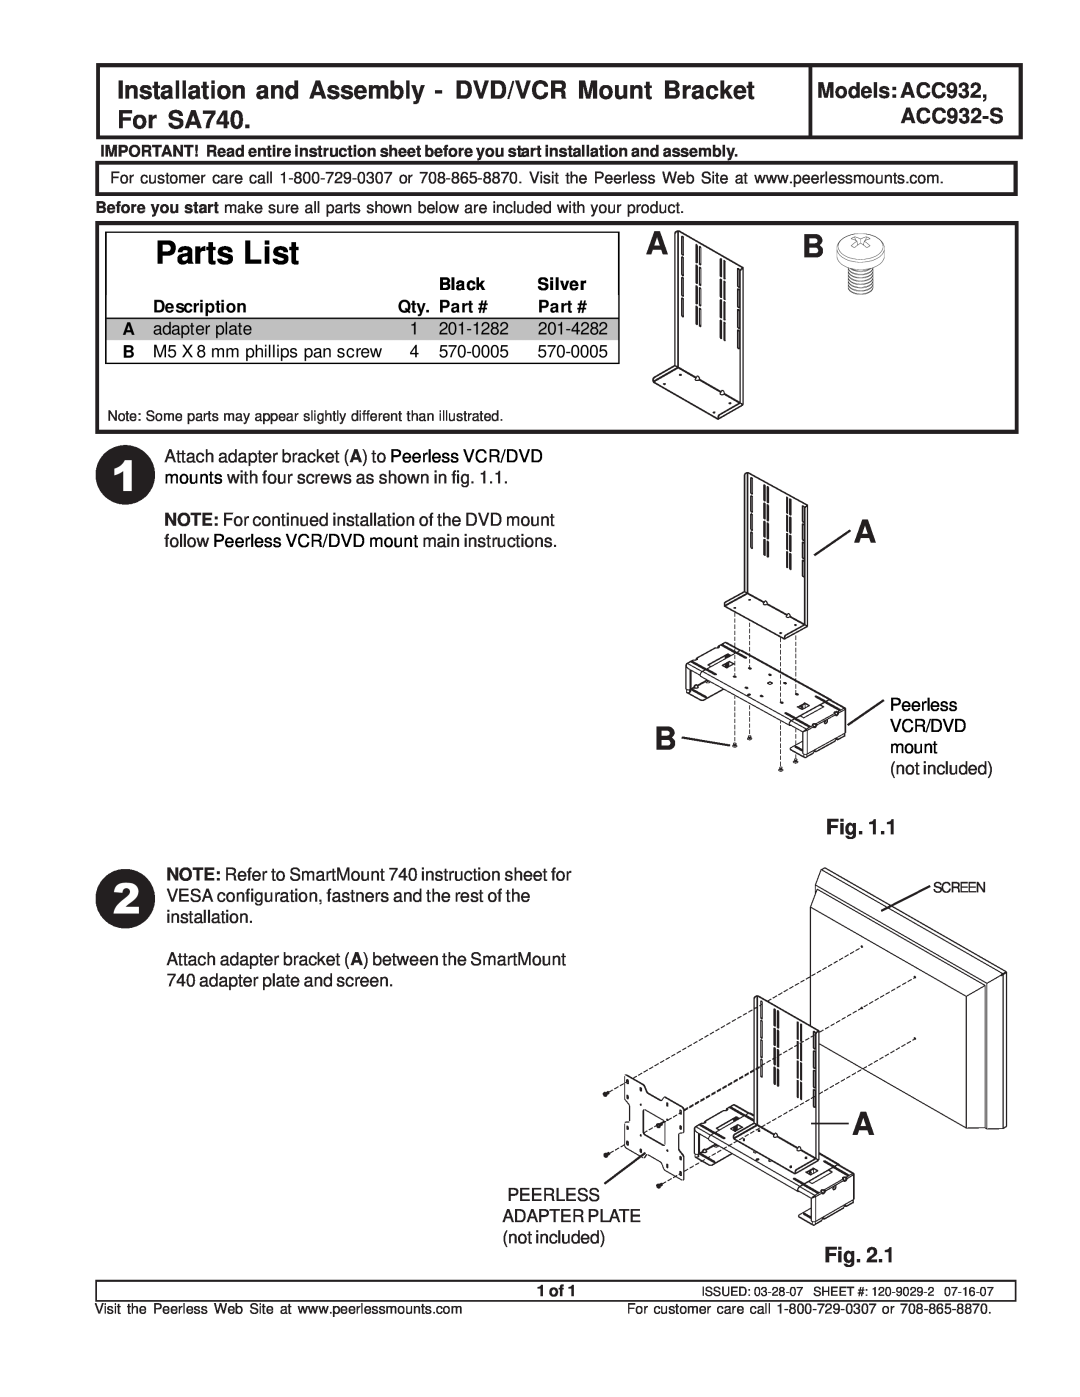 Peerless Industries ACC932 instruction sheet Parts List, Installation and Assembly - DVD/VCR Mount Bracket For SA740 